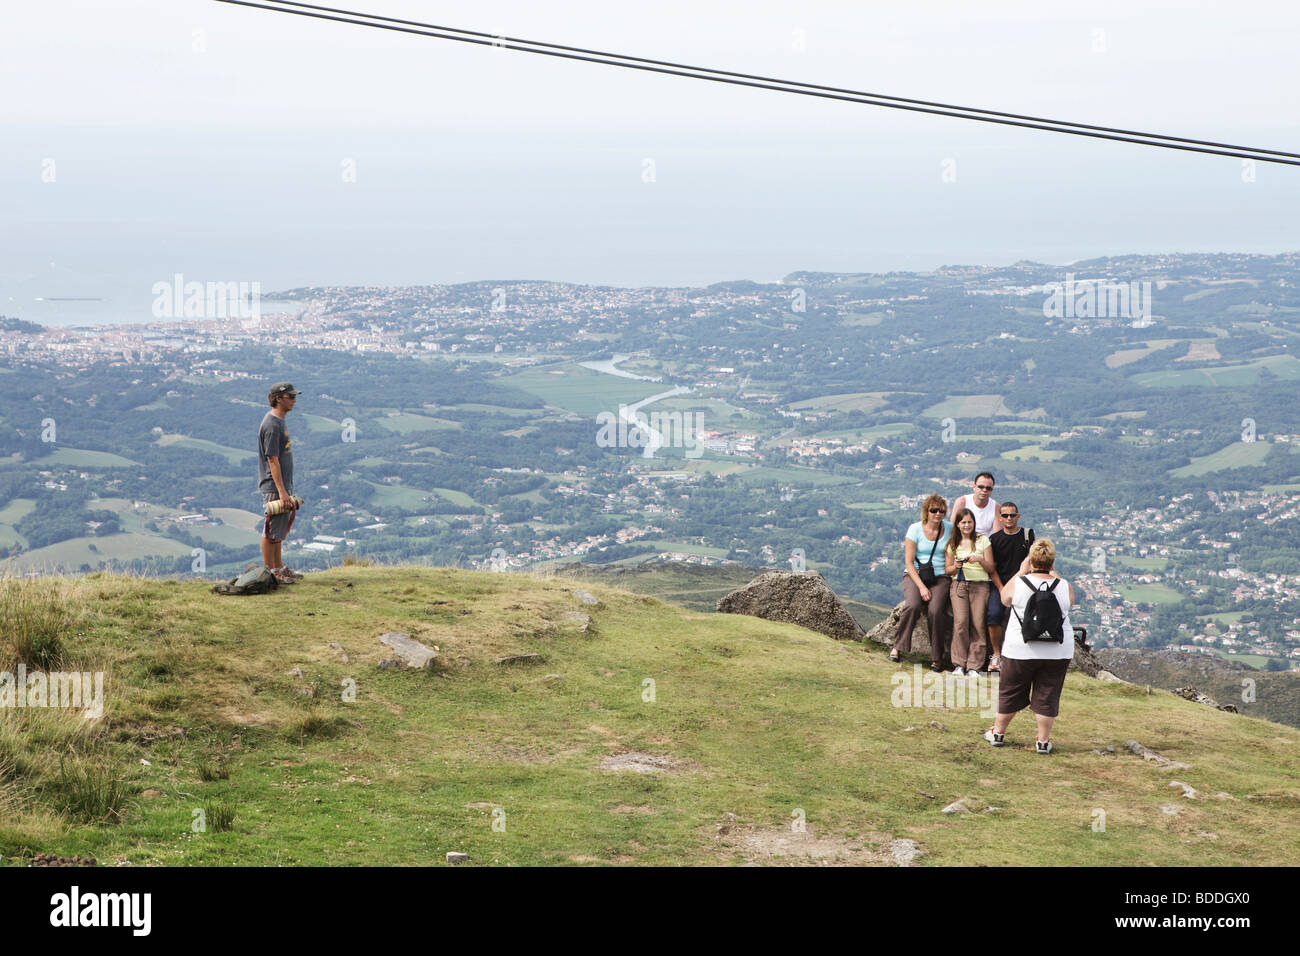 Tourists taking photos at La Rhune mountain and observation point, Basque Country, France Stock Photo